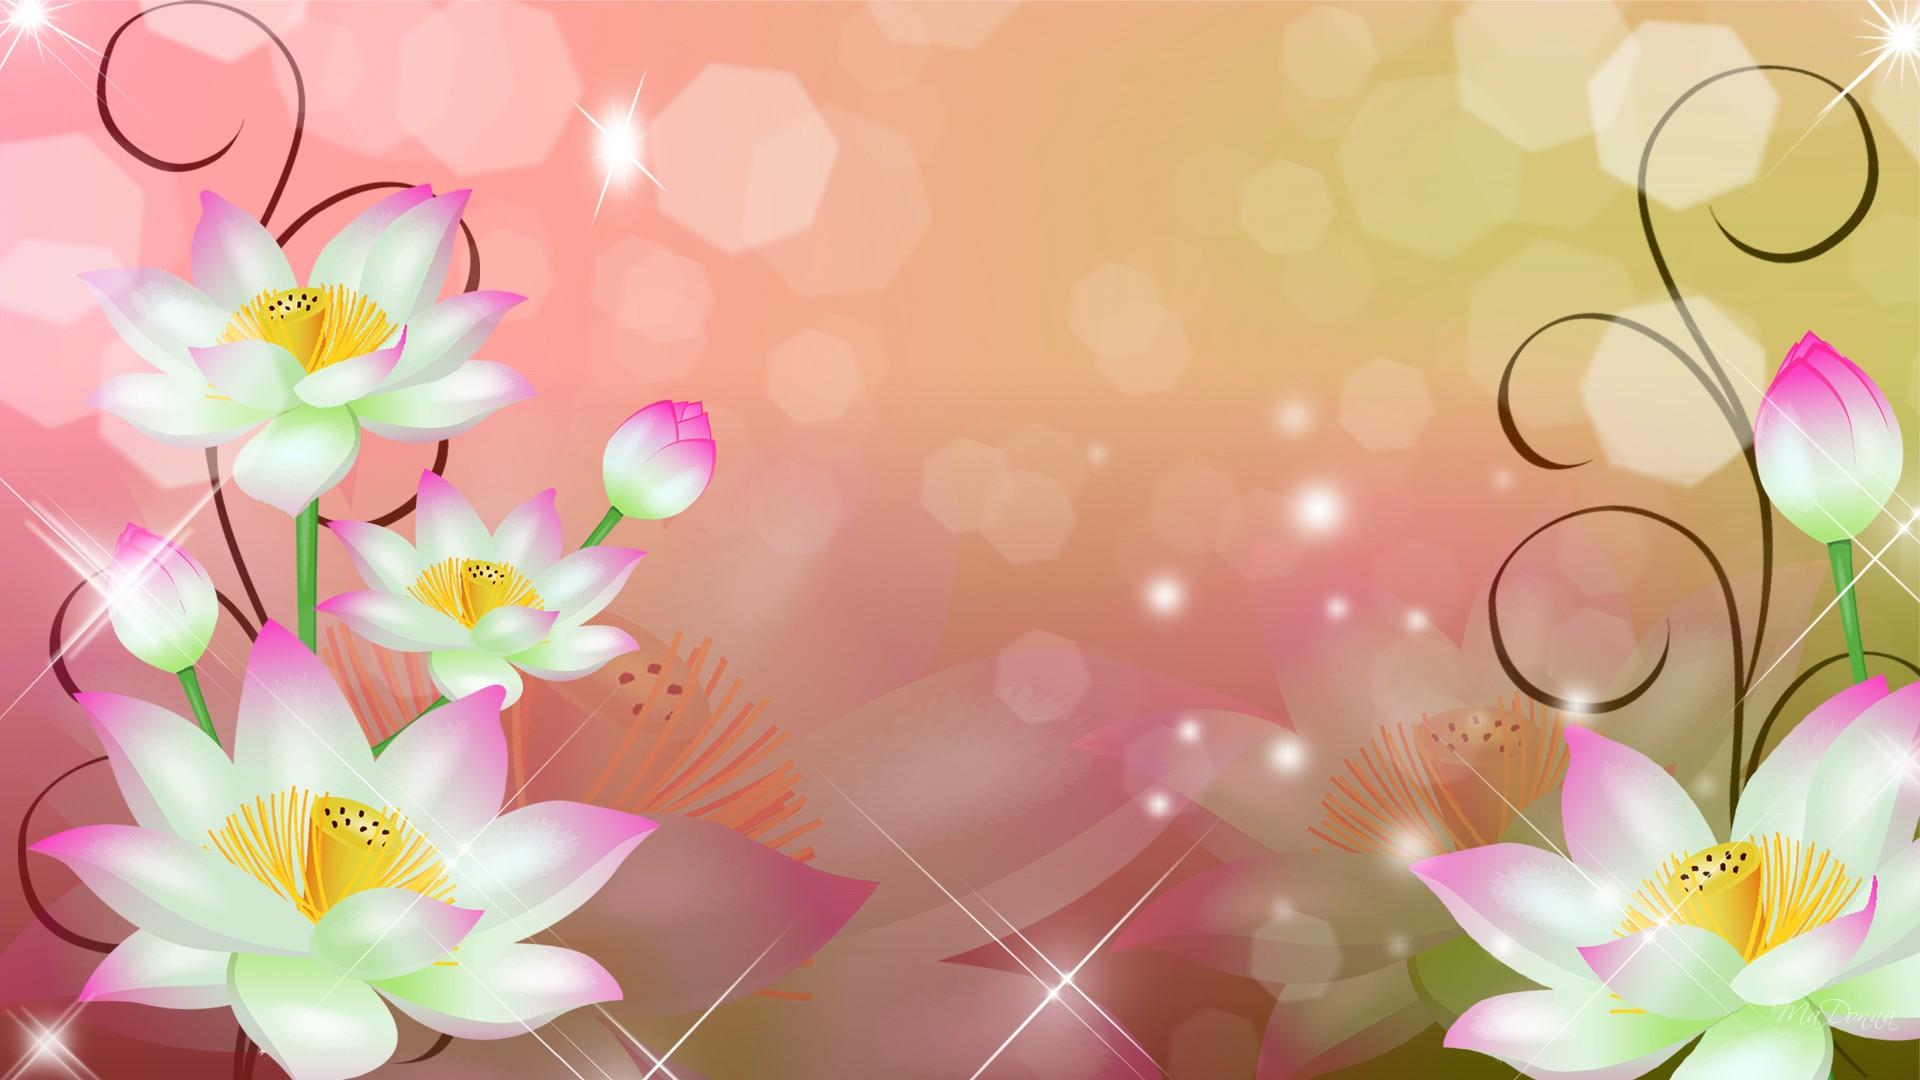 Flowers Androids #4518  WallDiskPaper Clipart PPT Backgrounds